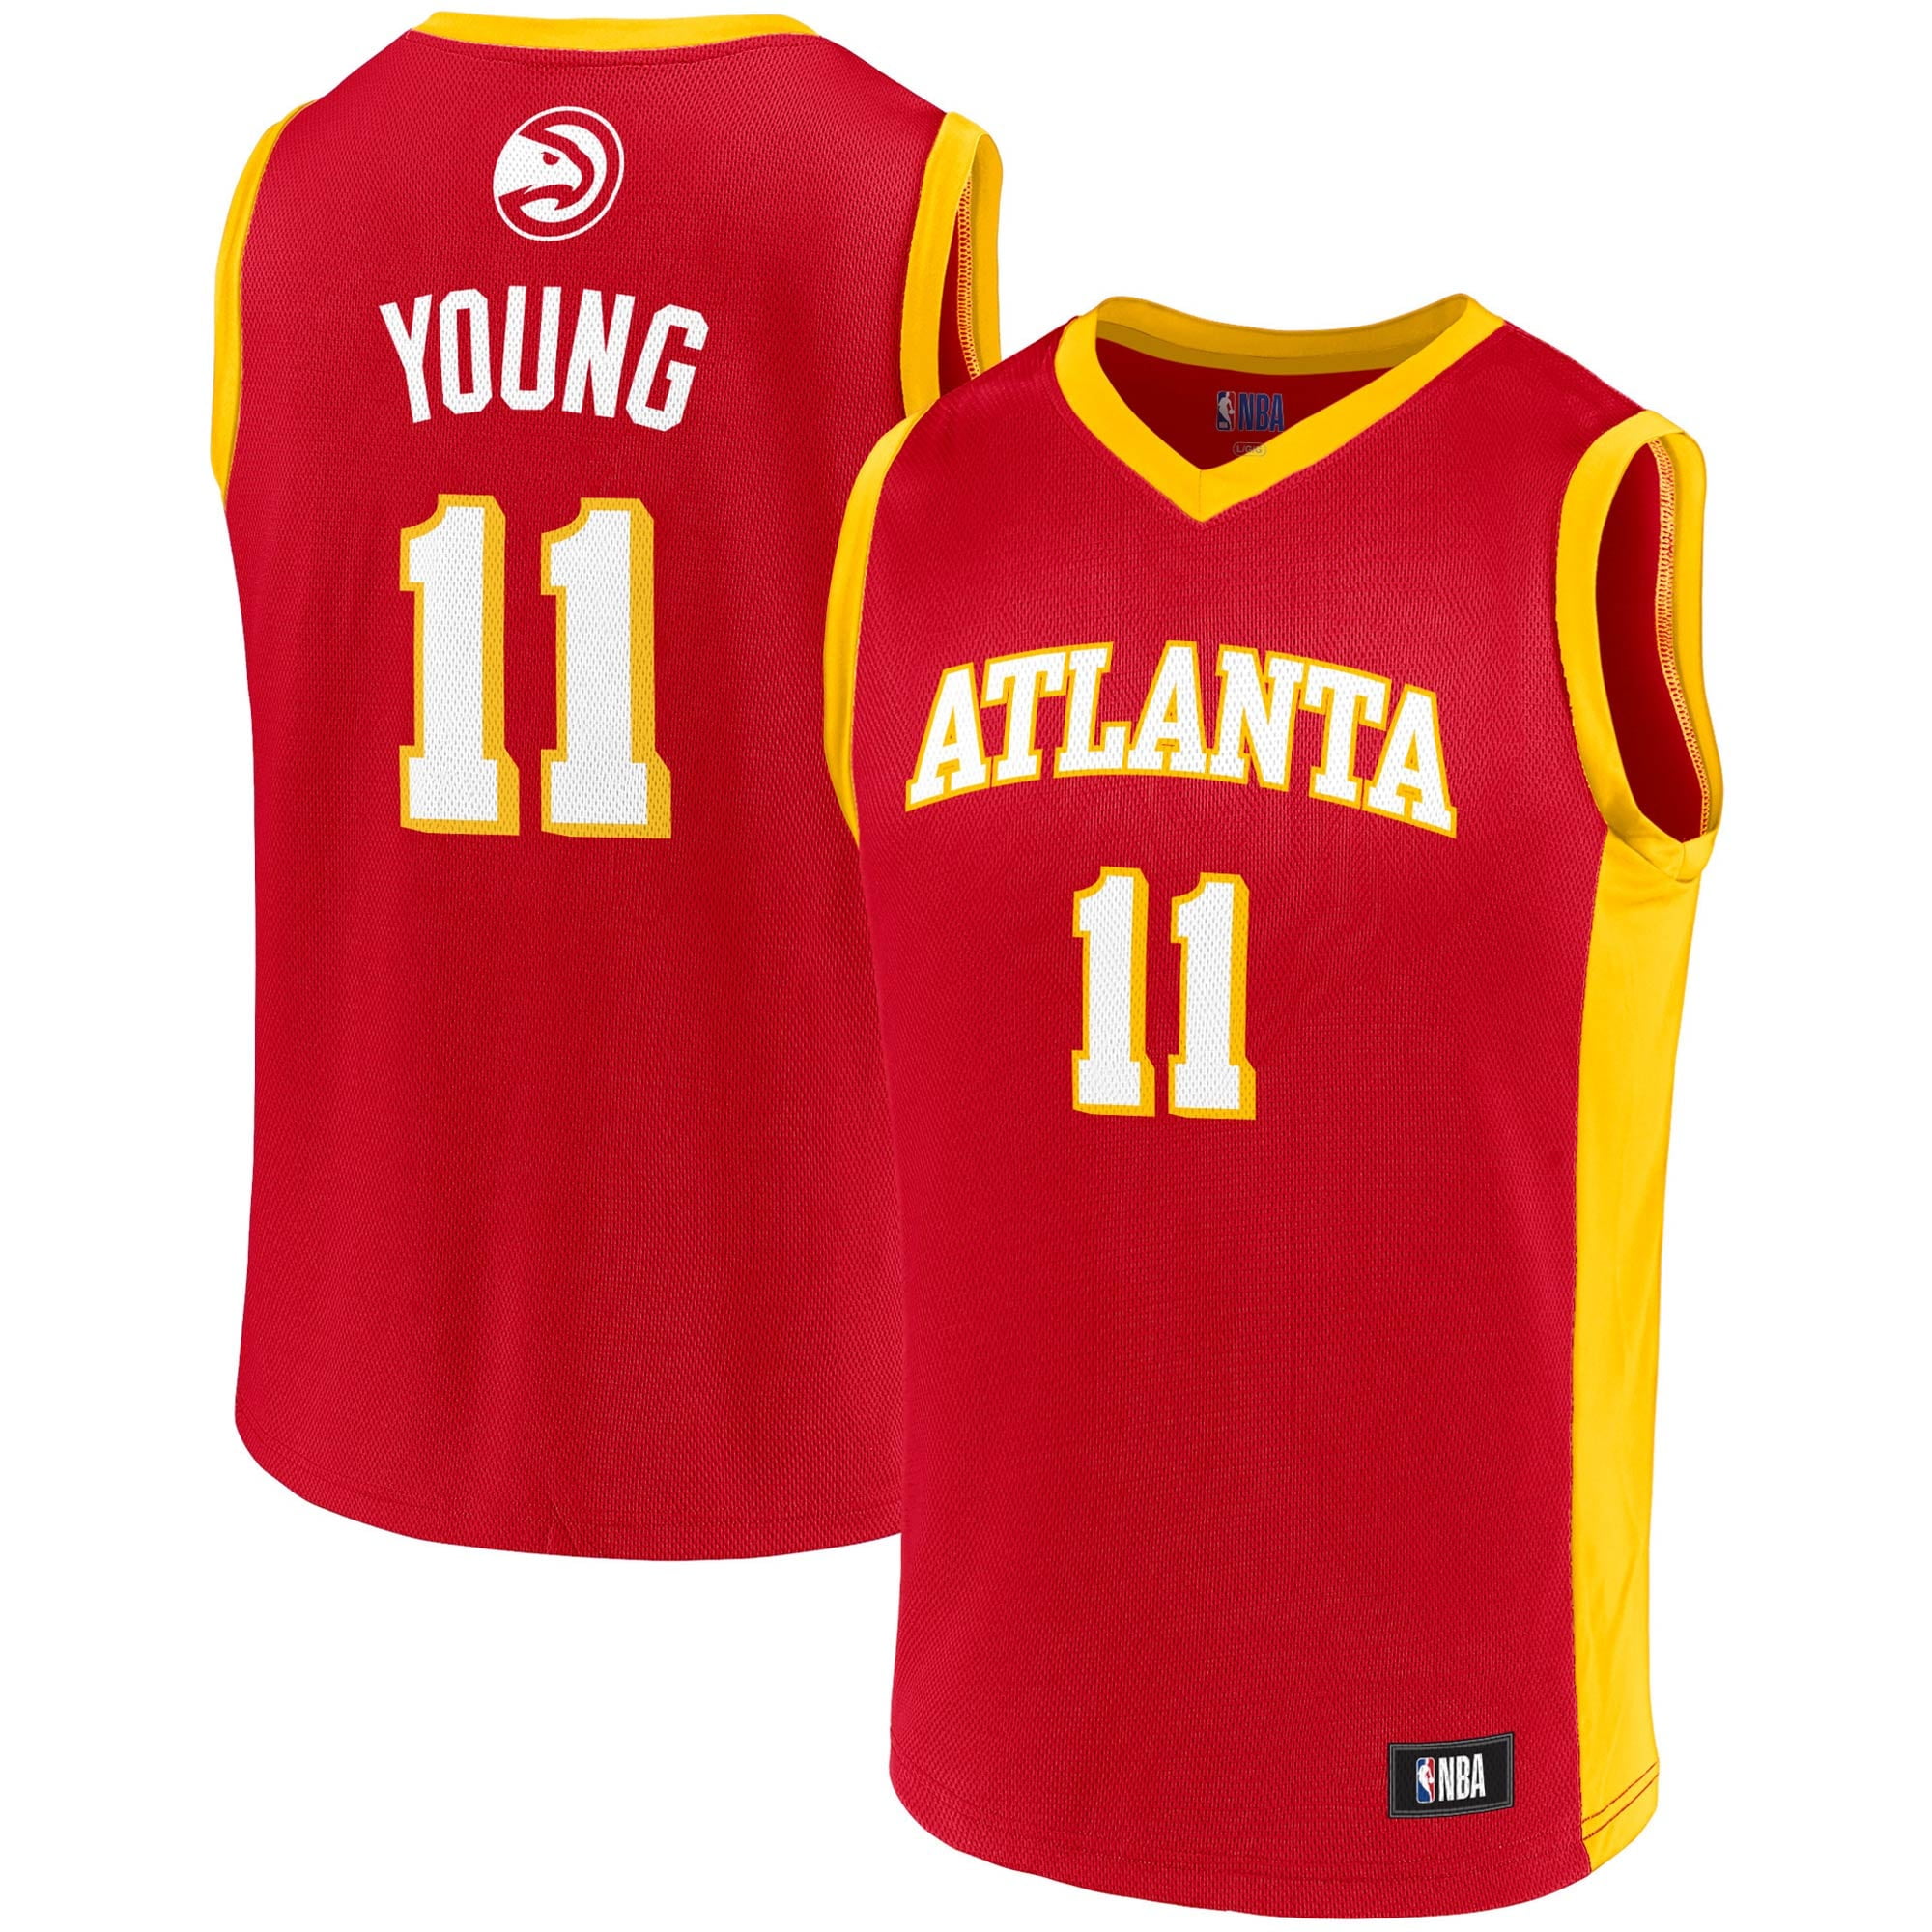 red and yellow basketball jersey